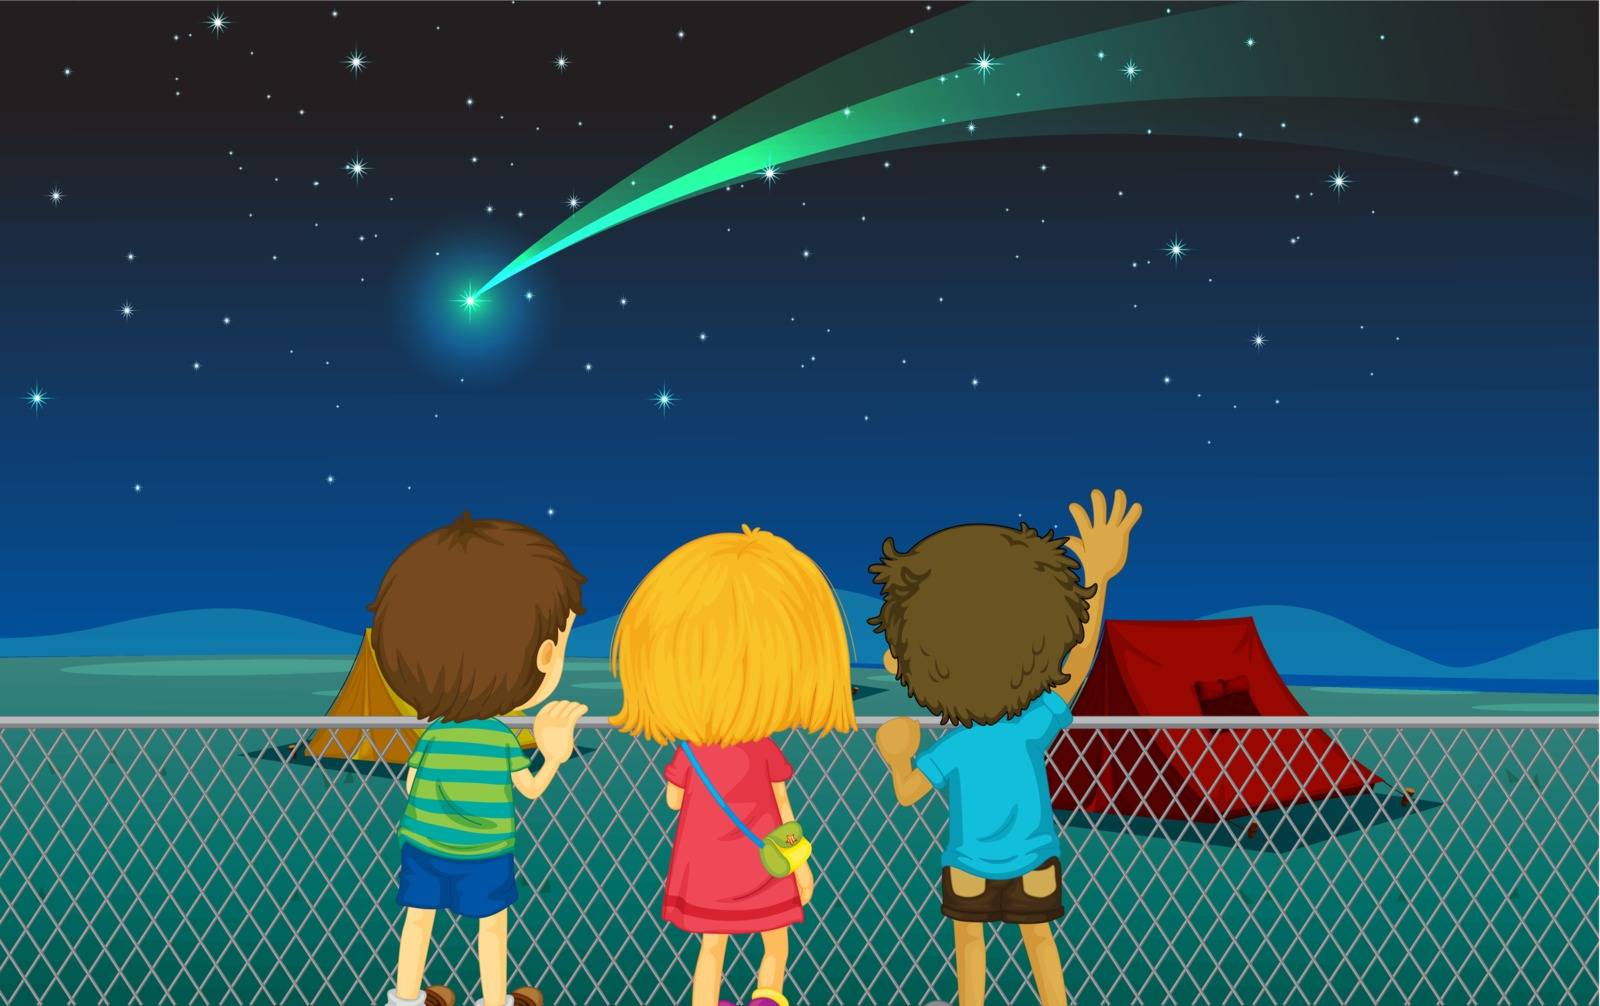 illustration of kids and comet in the night sky